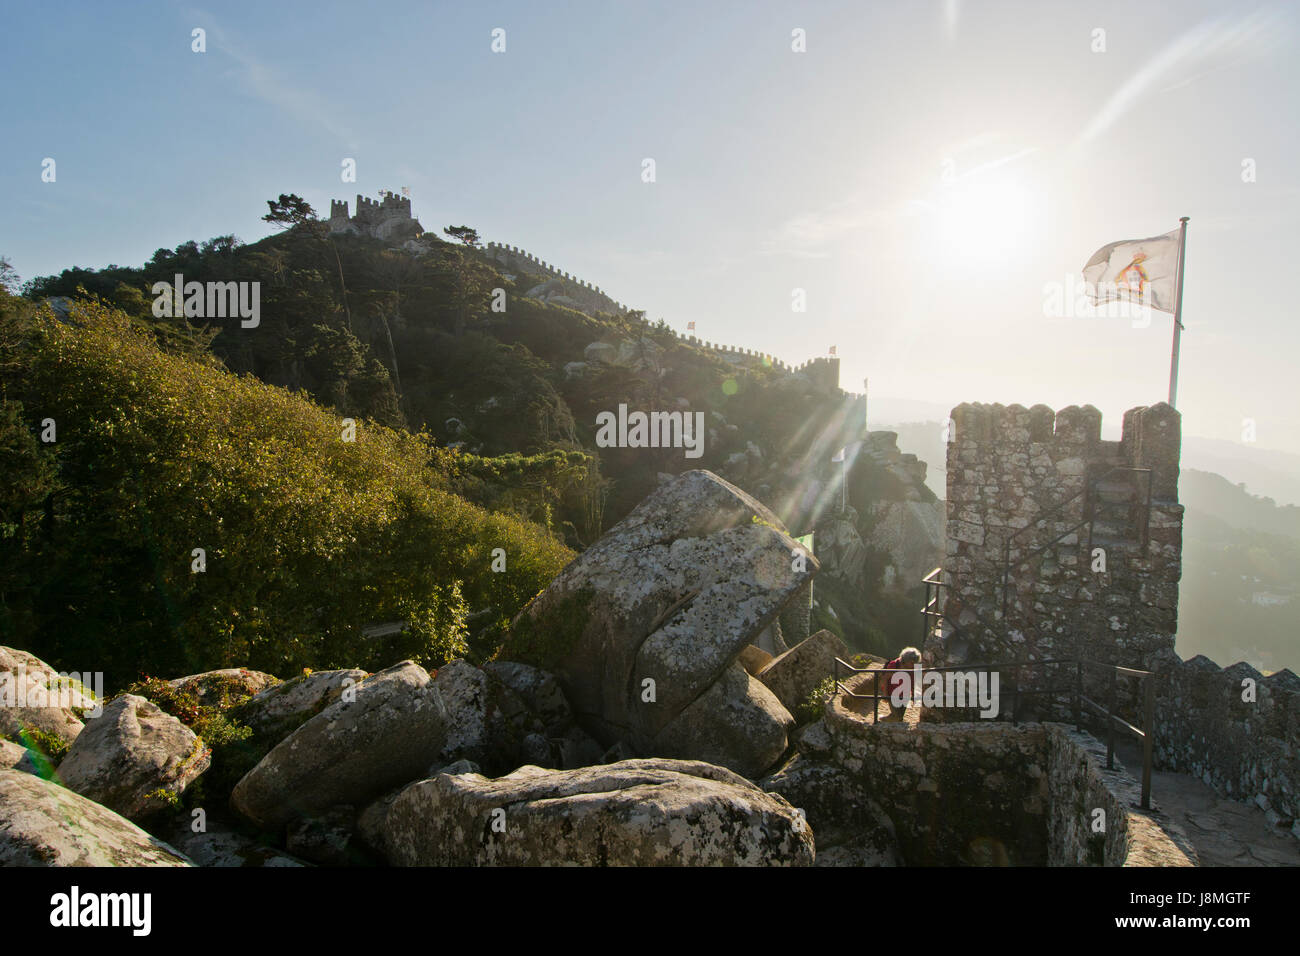 Castelo dos Mouros (Castle of the Moors), dating back to the 10th century. a Unesco World Heritage site. Portugal Stock Photo